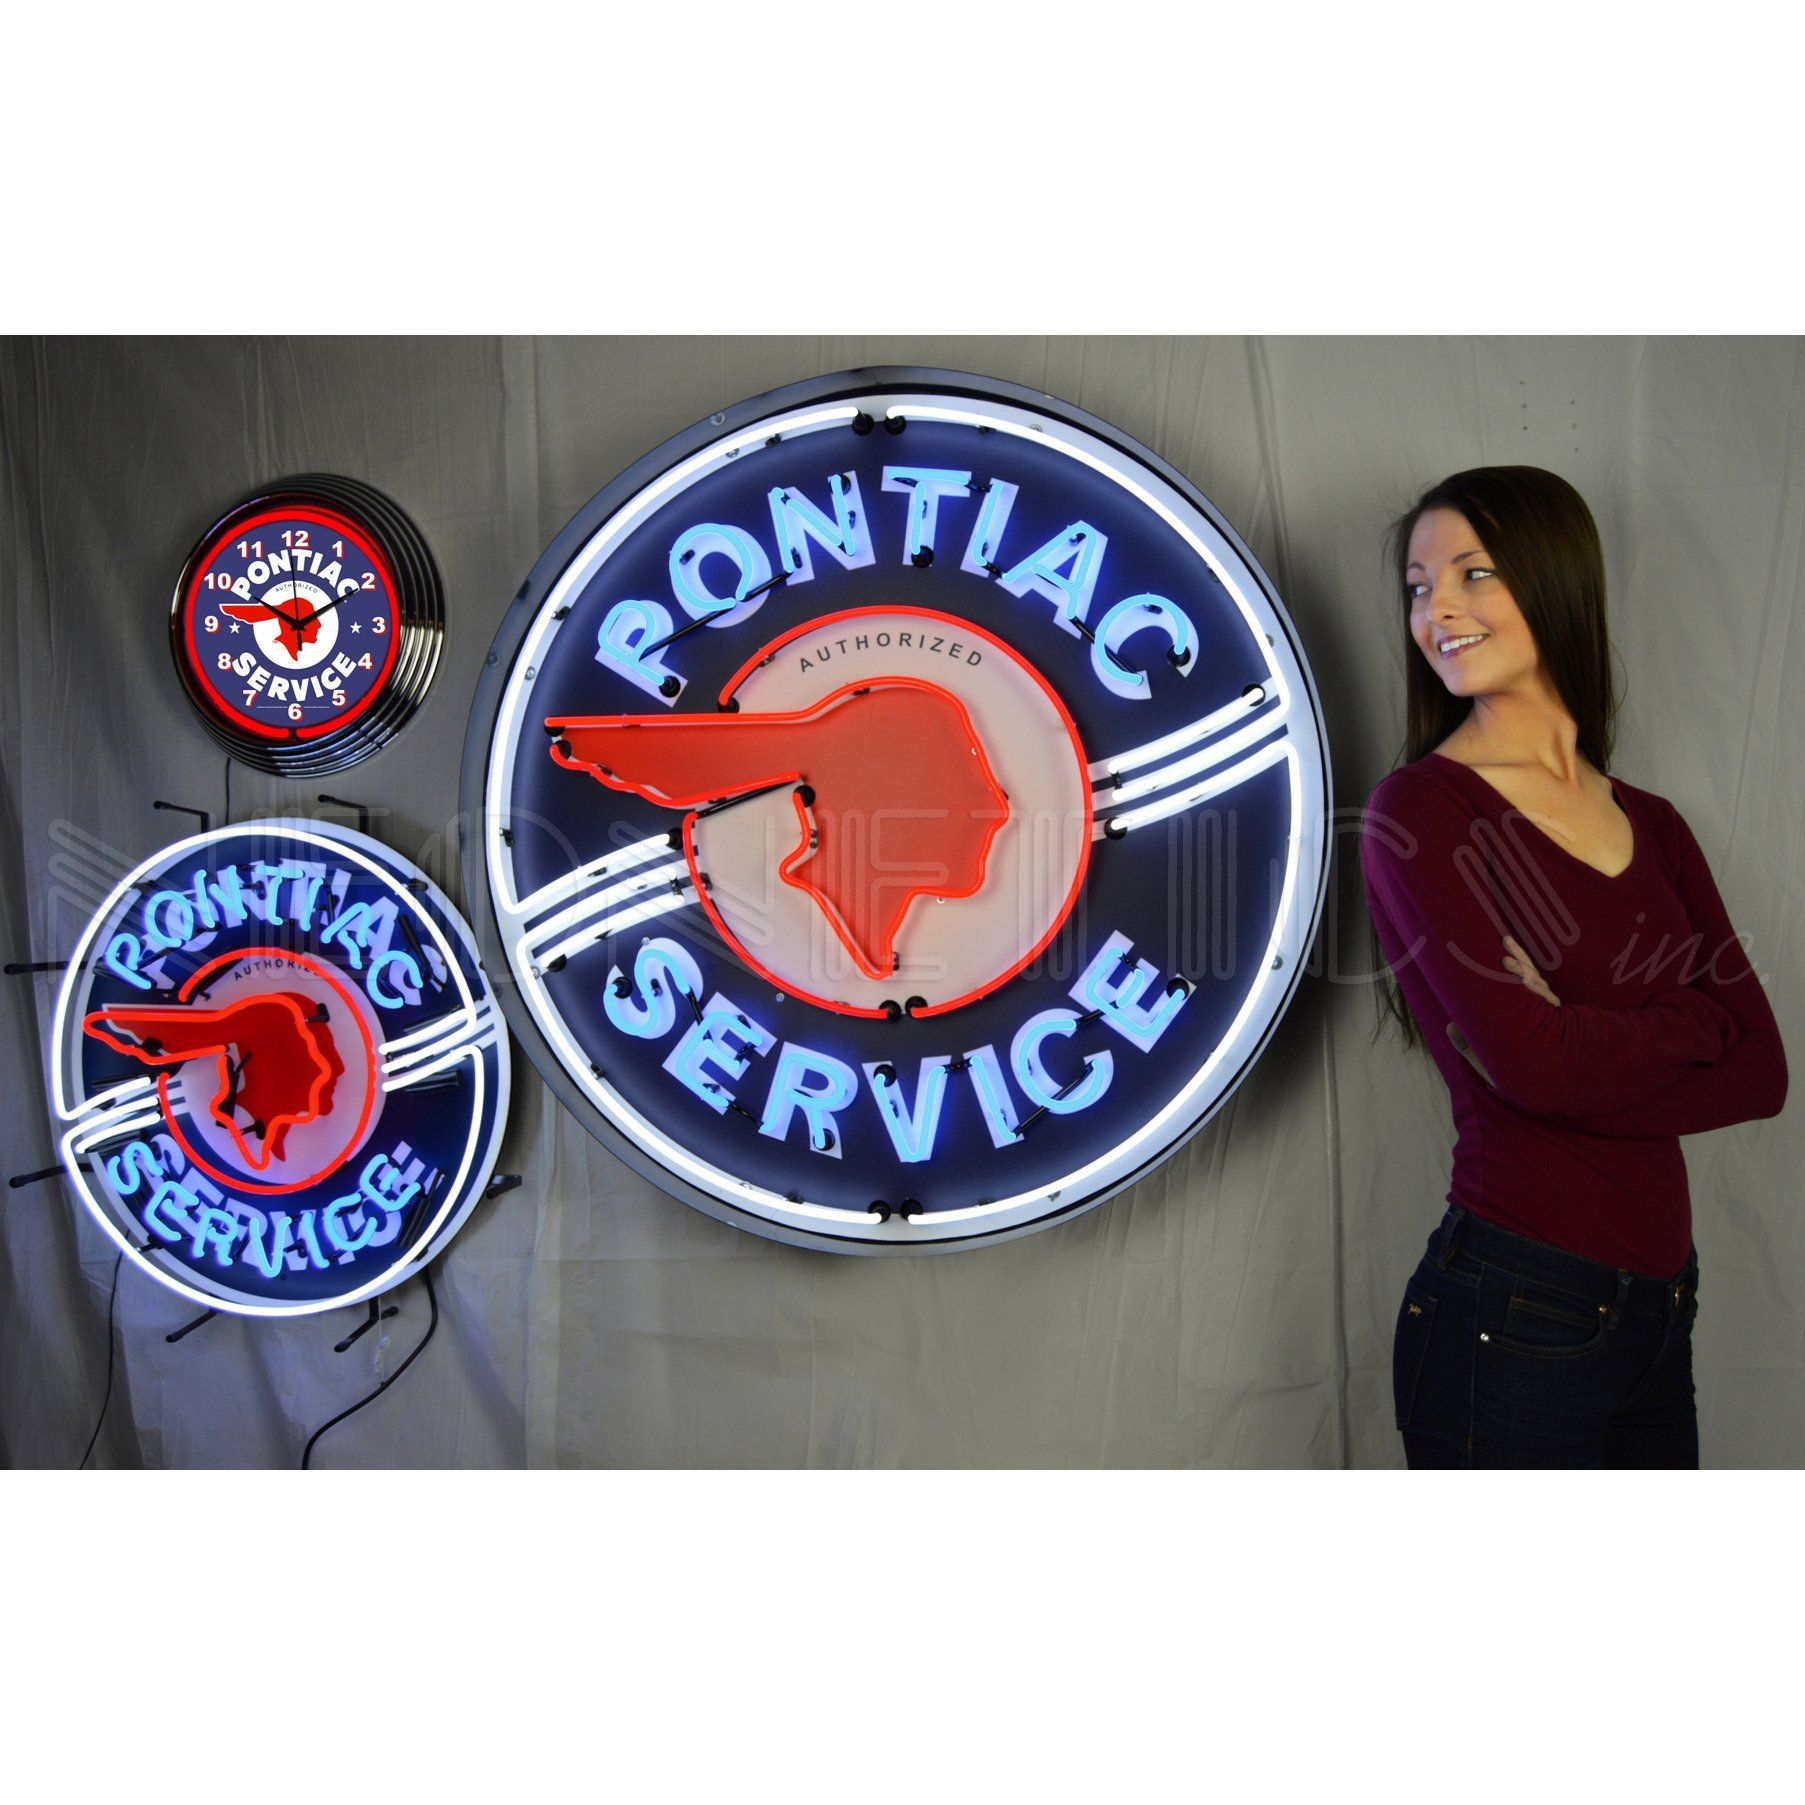 Neonetics Pontiac Service 36 Inch Neon Sign In Metal Can